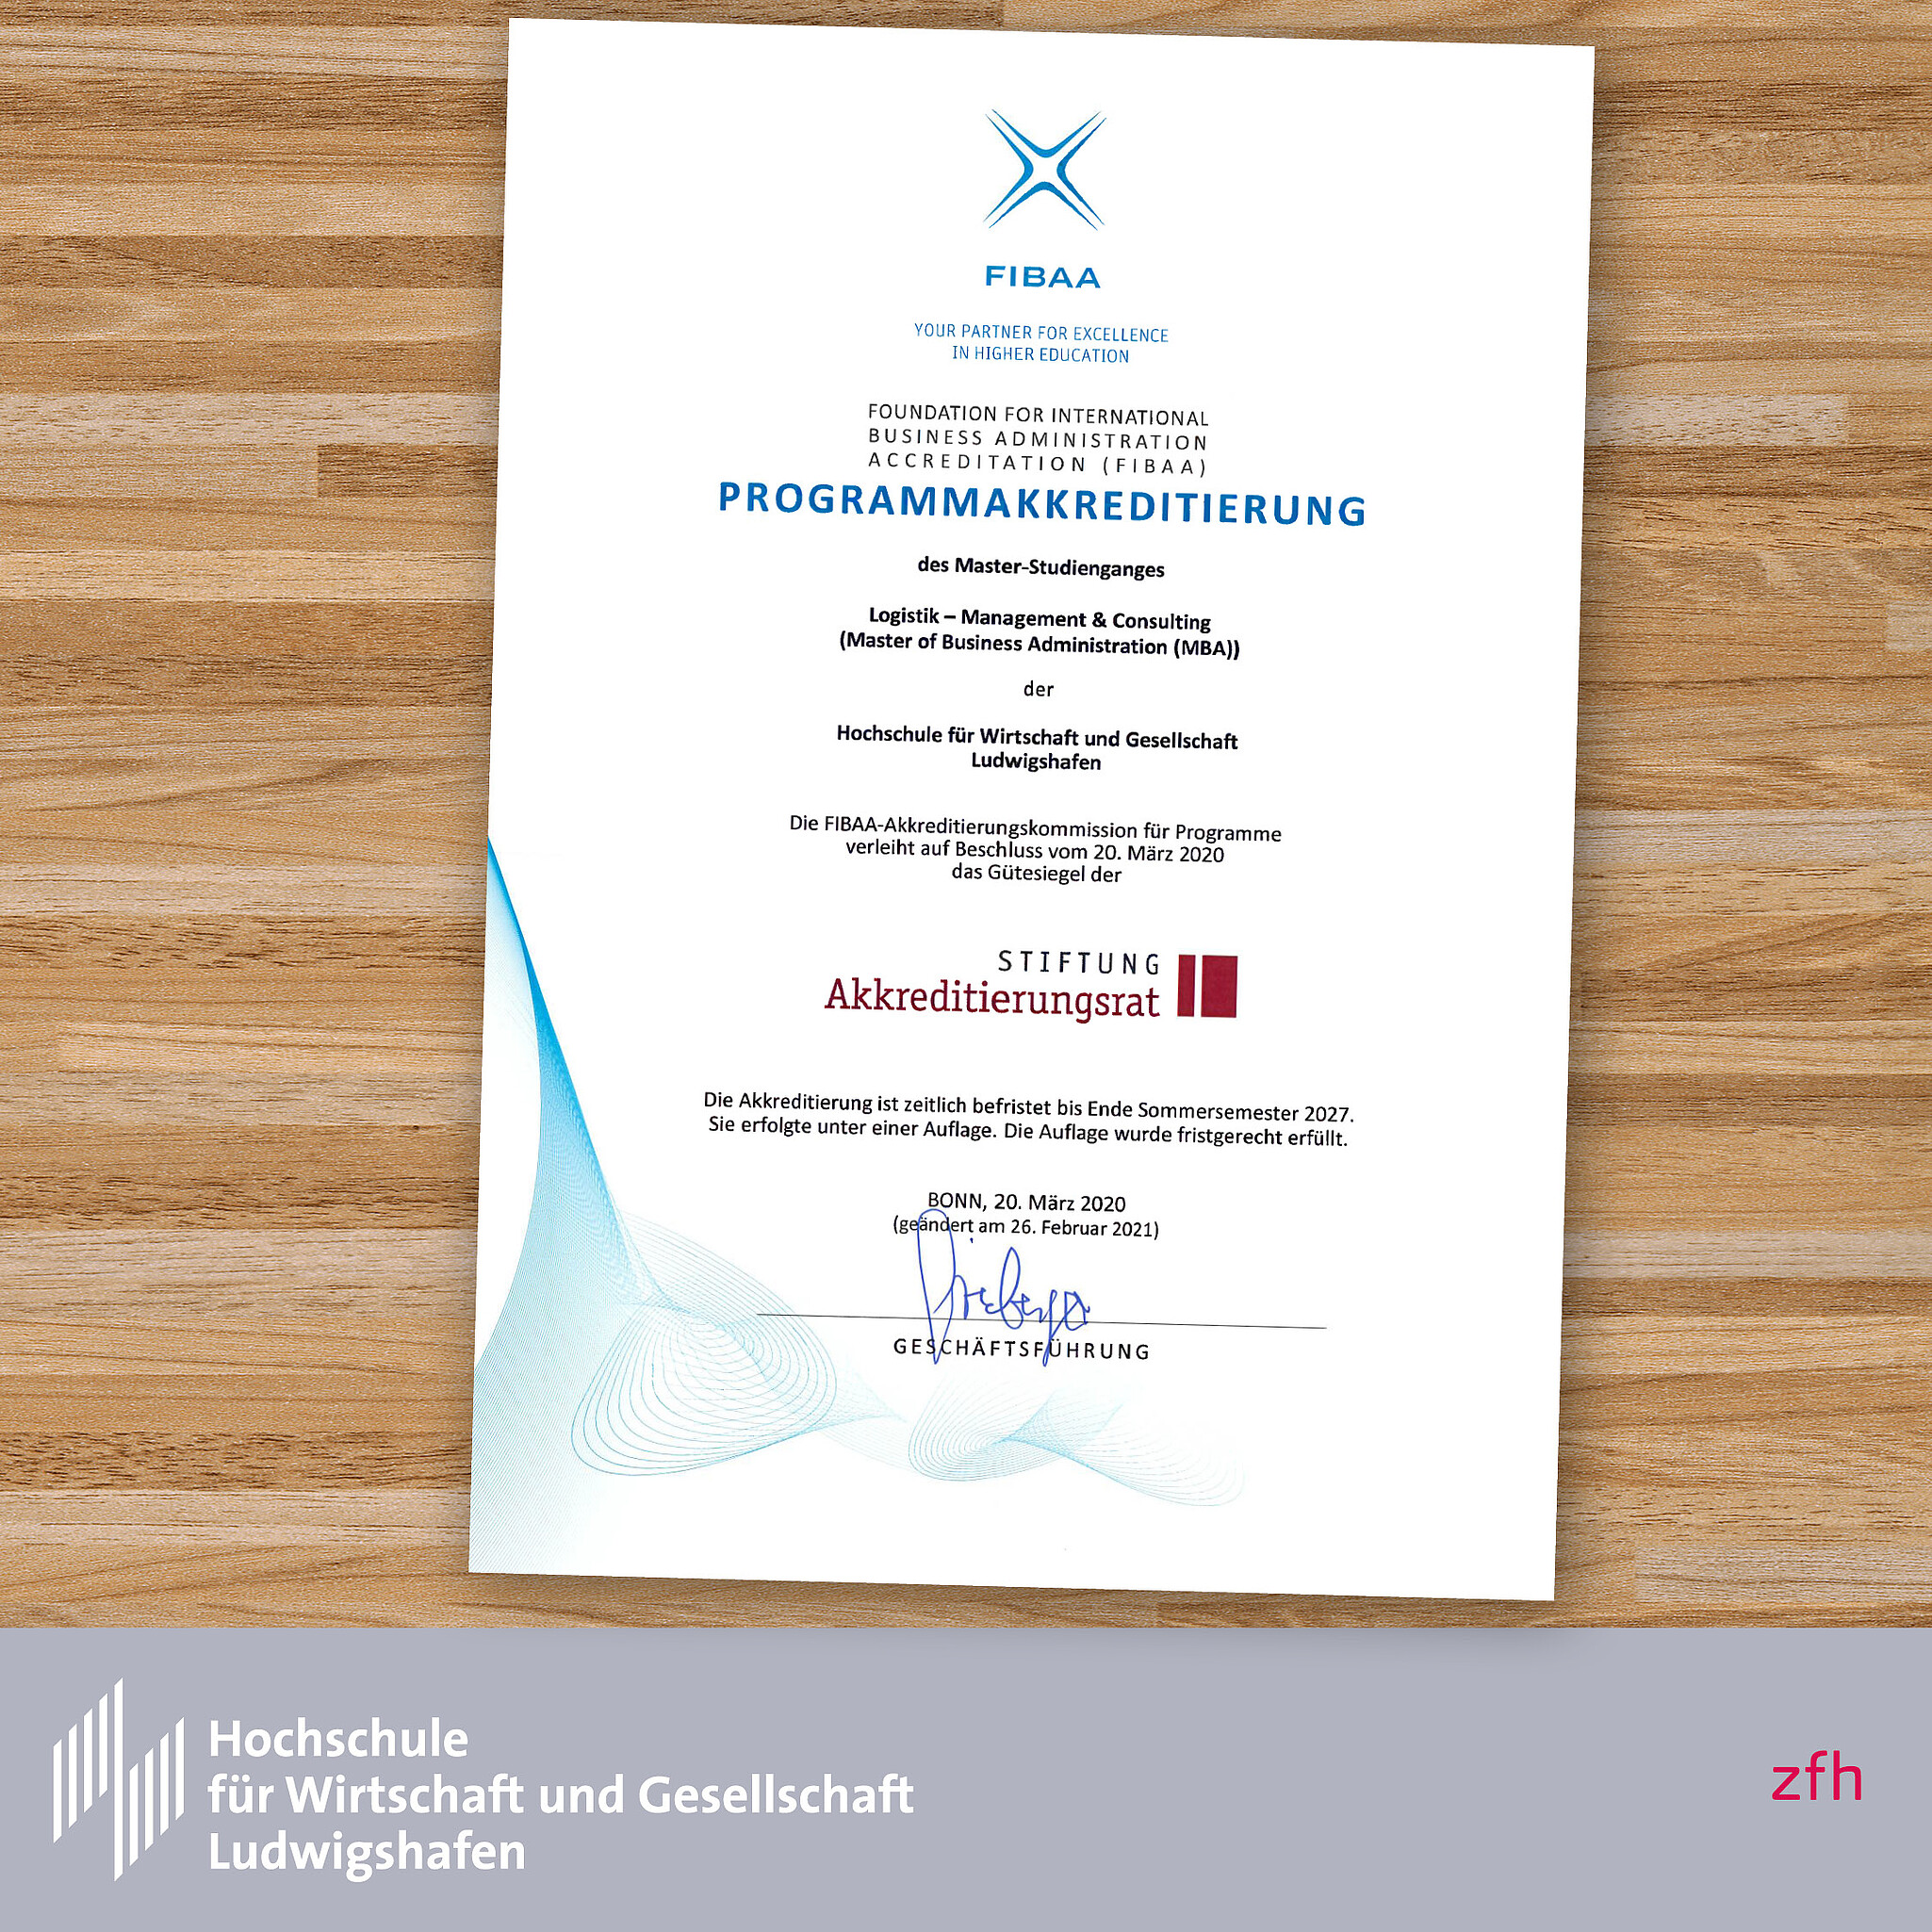 Certificate for the successful reaccreditation of the distance learning program Logistics - Management & Consulting (MBA) (Image: zfh)